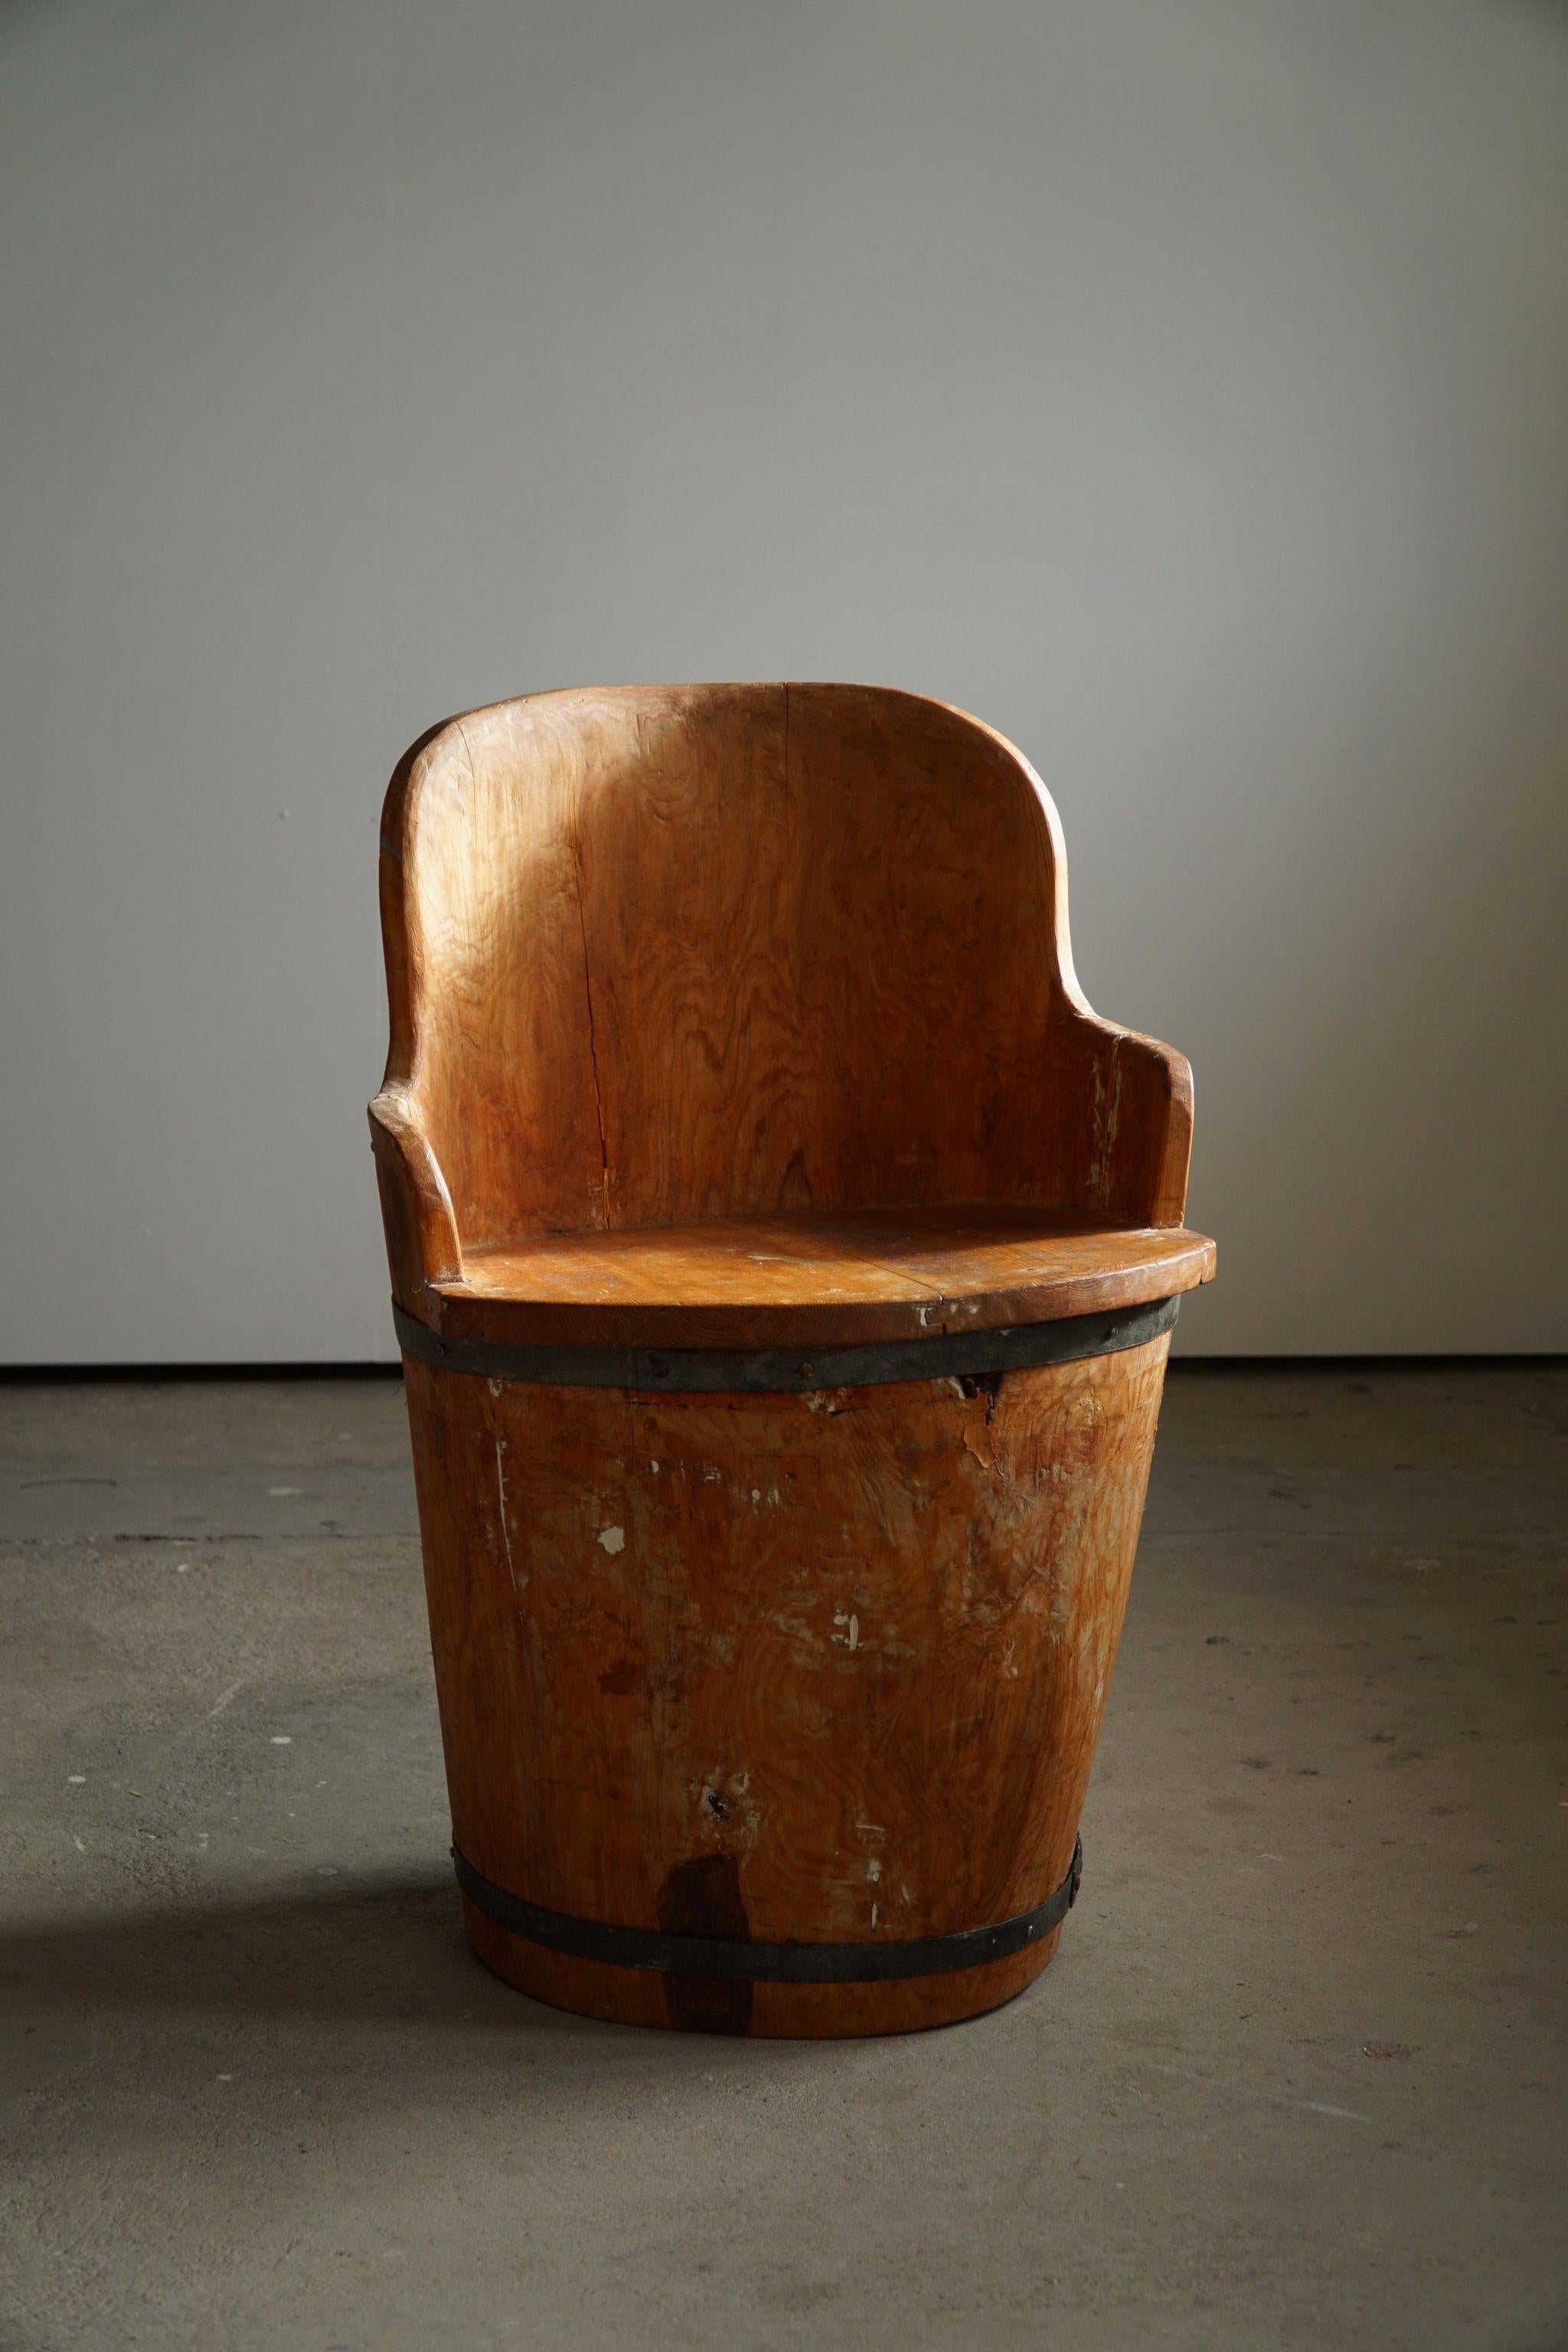 Mid 20th Century Wabi Sabi Stump Chair in Pine, by a Swedish Cabinetmaker, 1950s In Fair Condition For Sale In Odense, DK